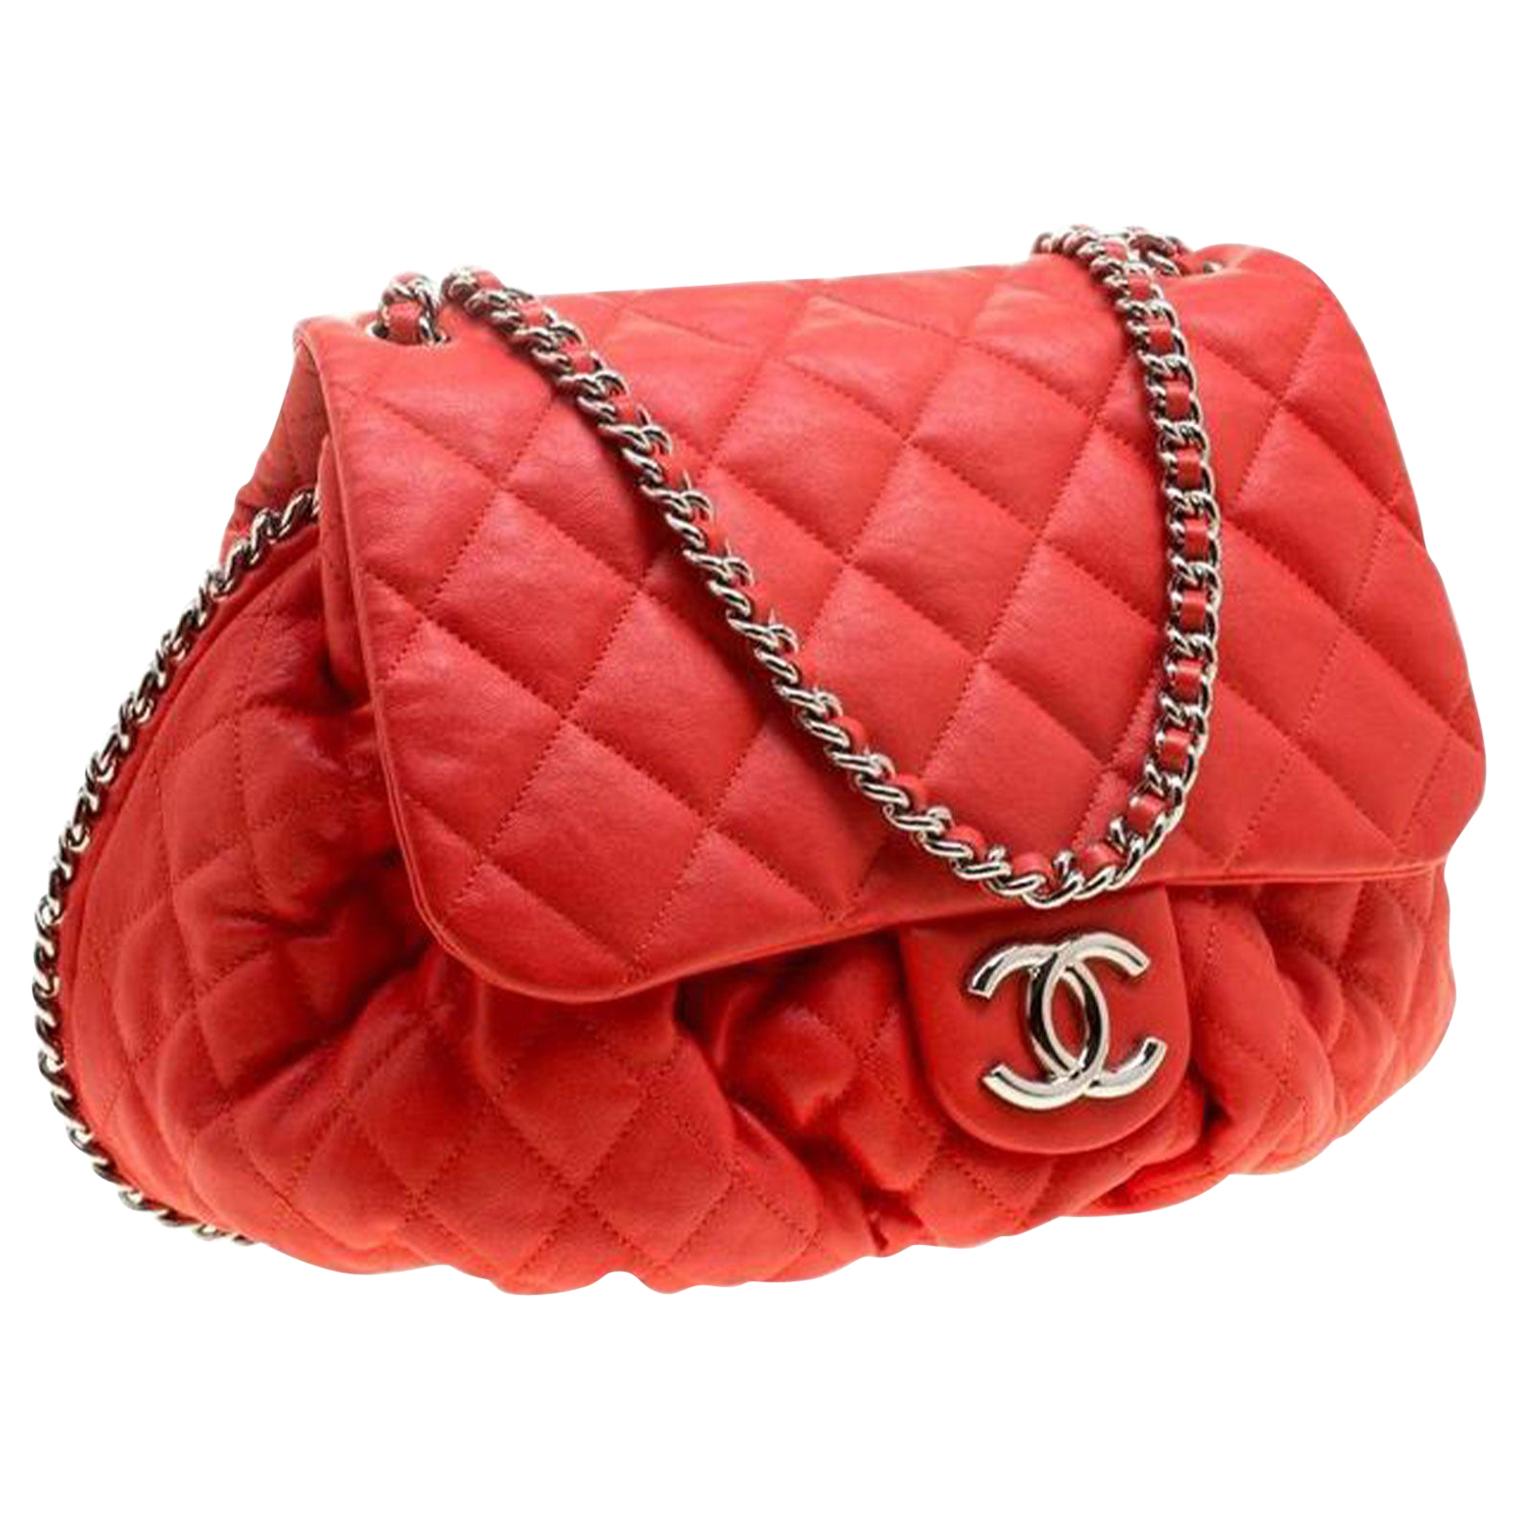 Chanel Large Chain Around Limited Edition Pristine Red Calfskin Leather  Flap Bag